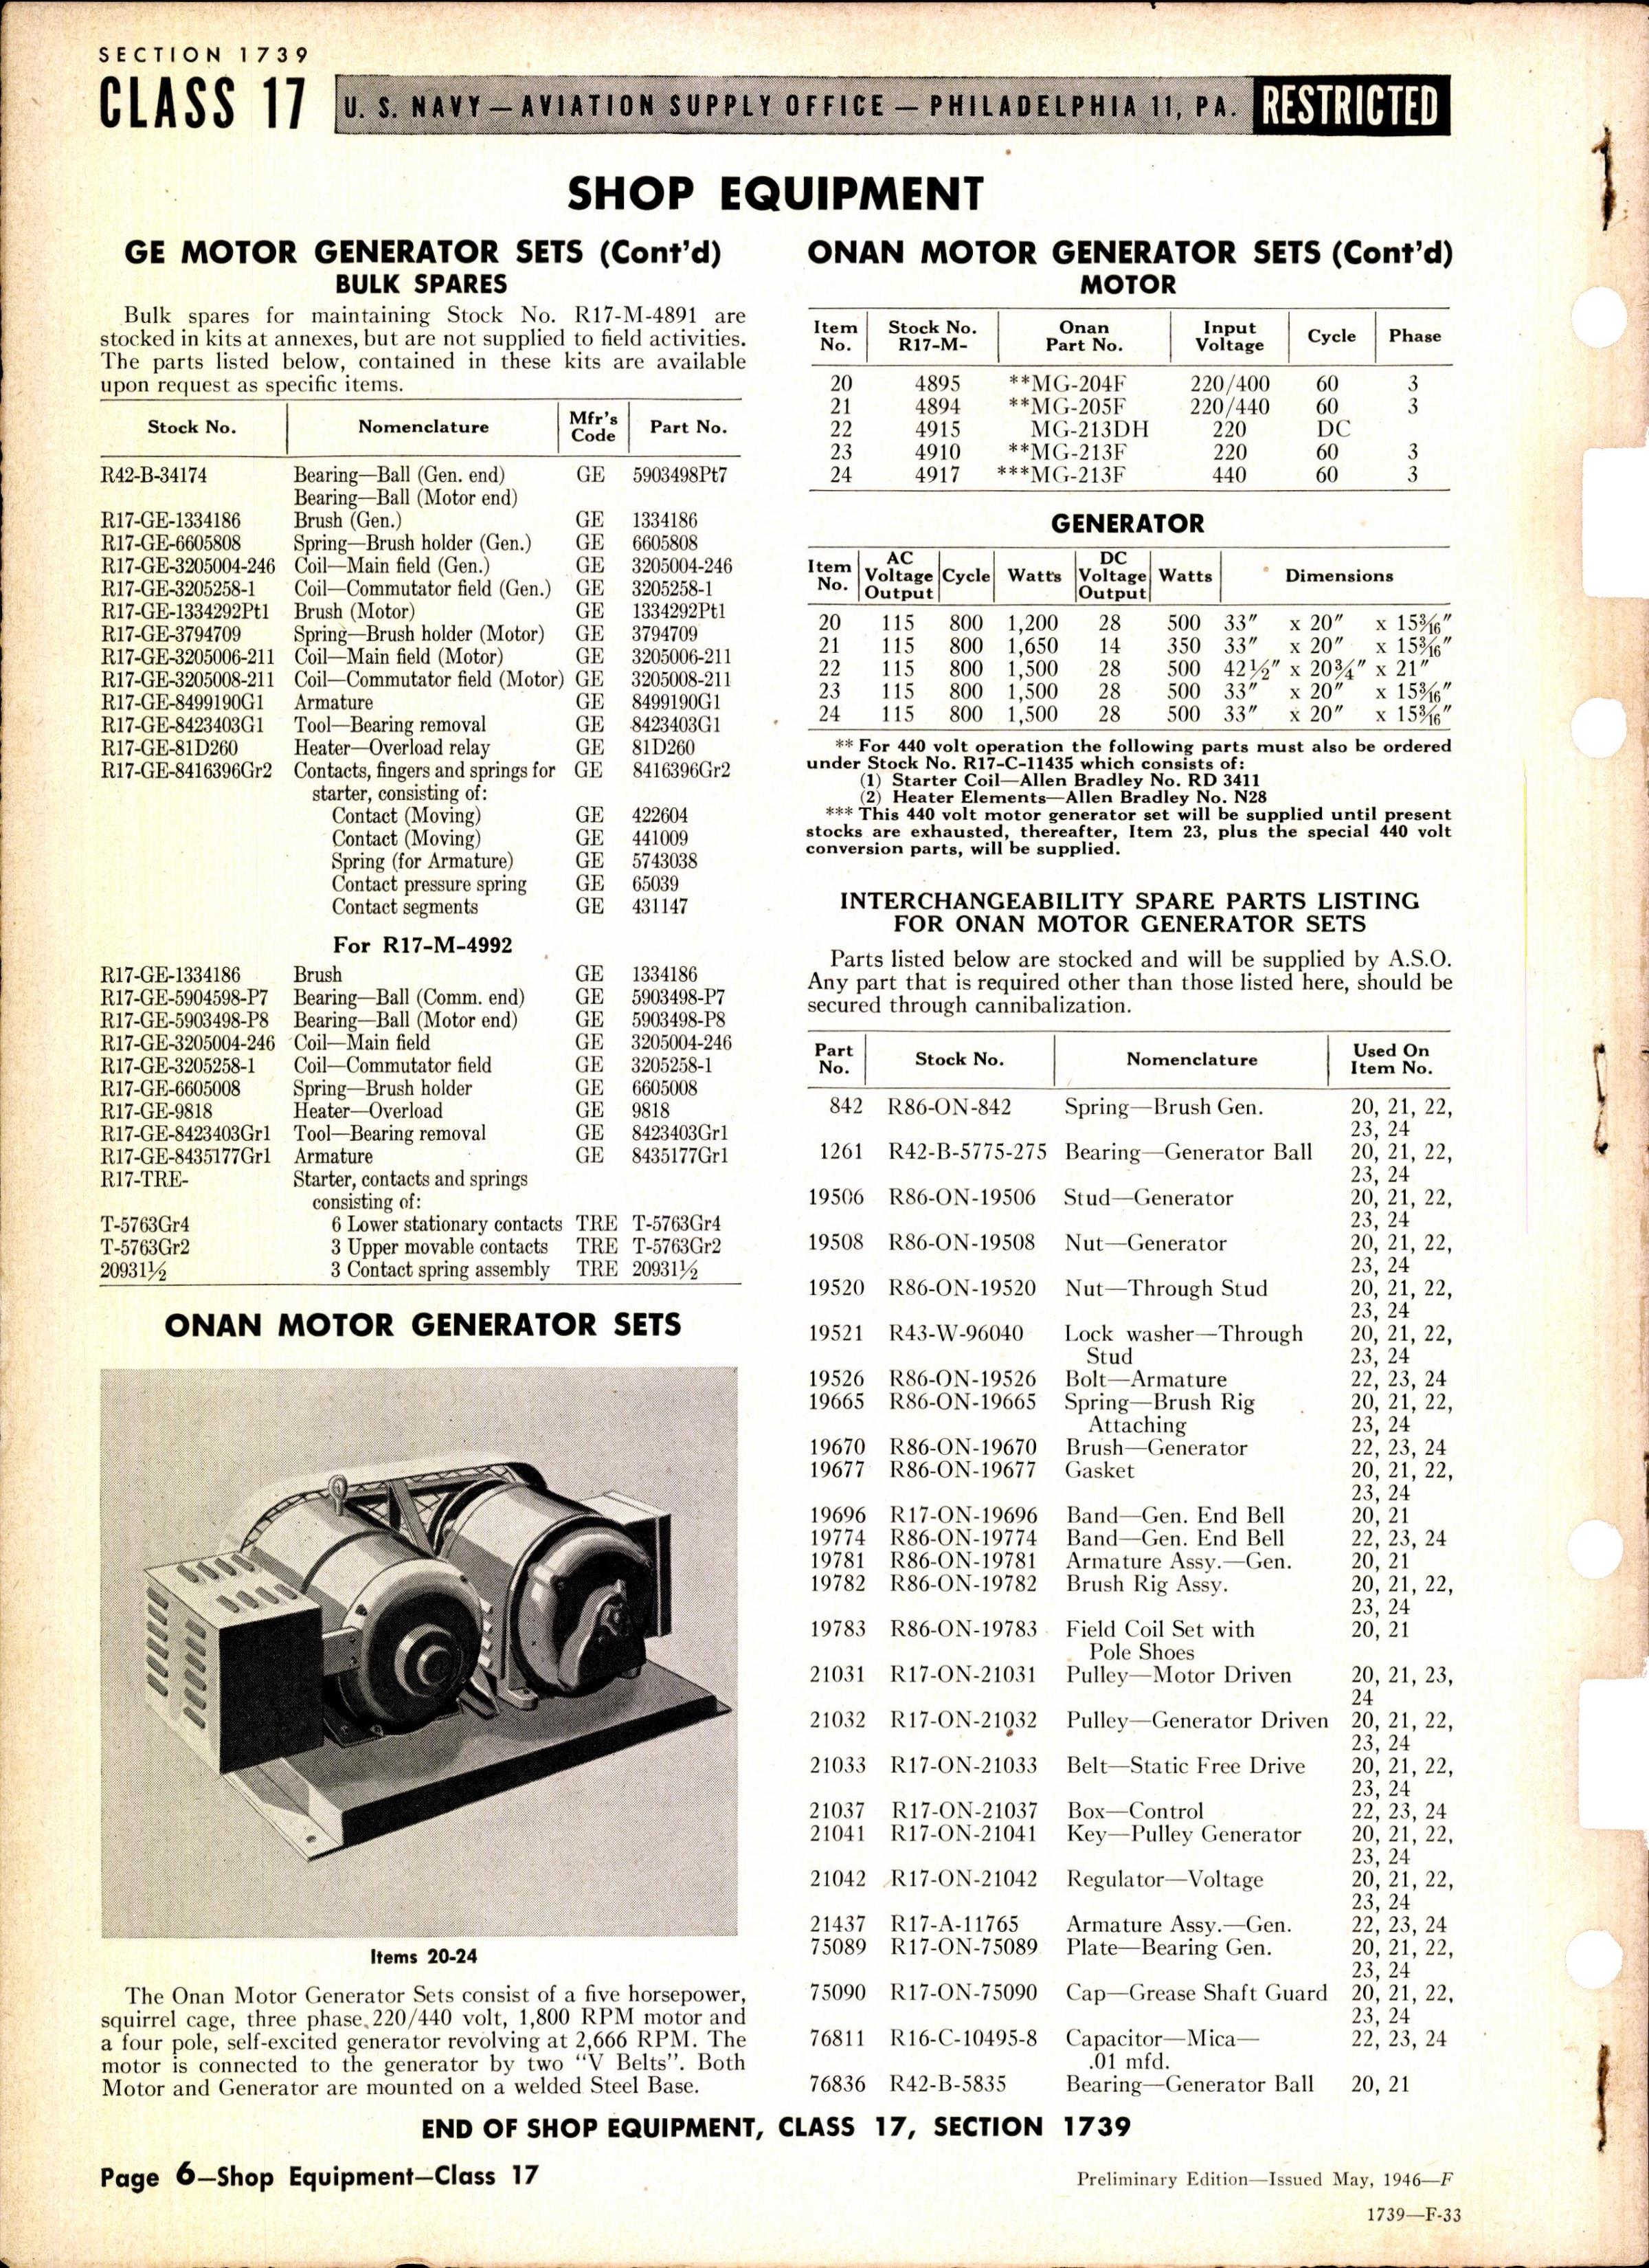 Sample page 6 from AirCorps Library document: Shop Equipment